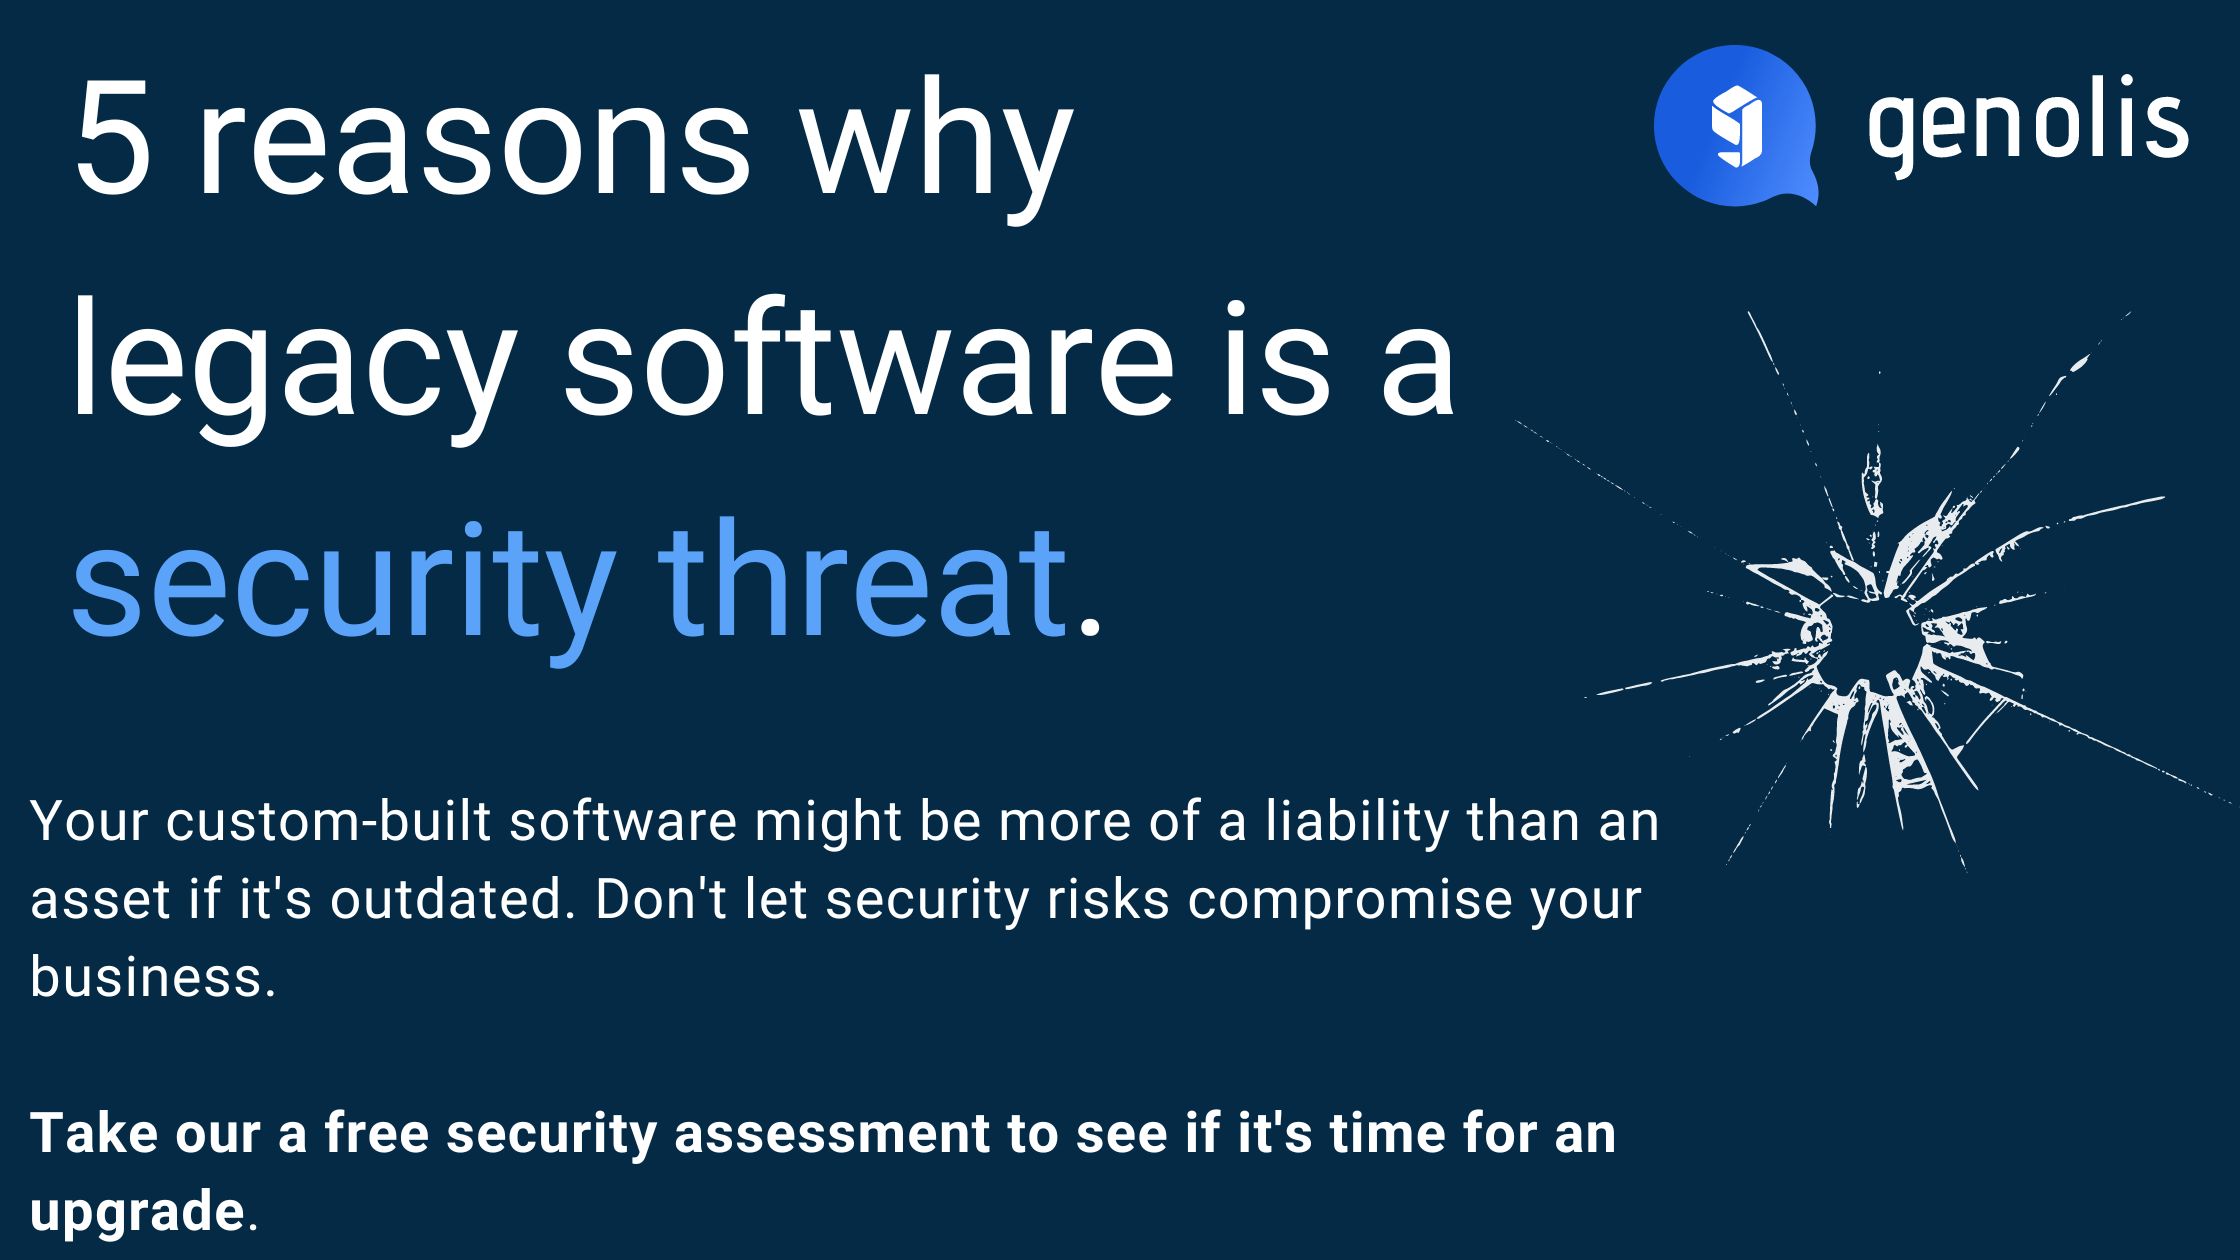 5 Reasons Why Legacy Software is a Security Threat